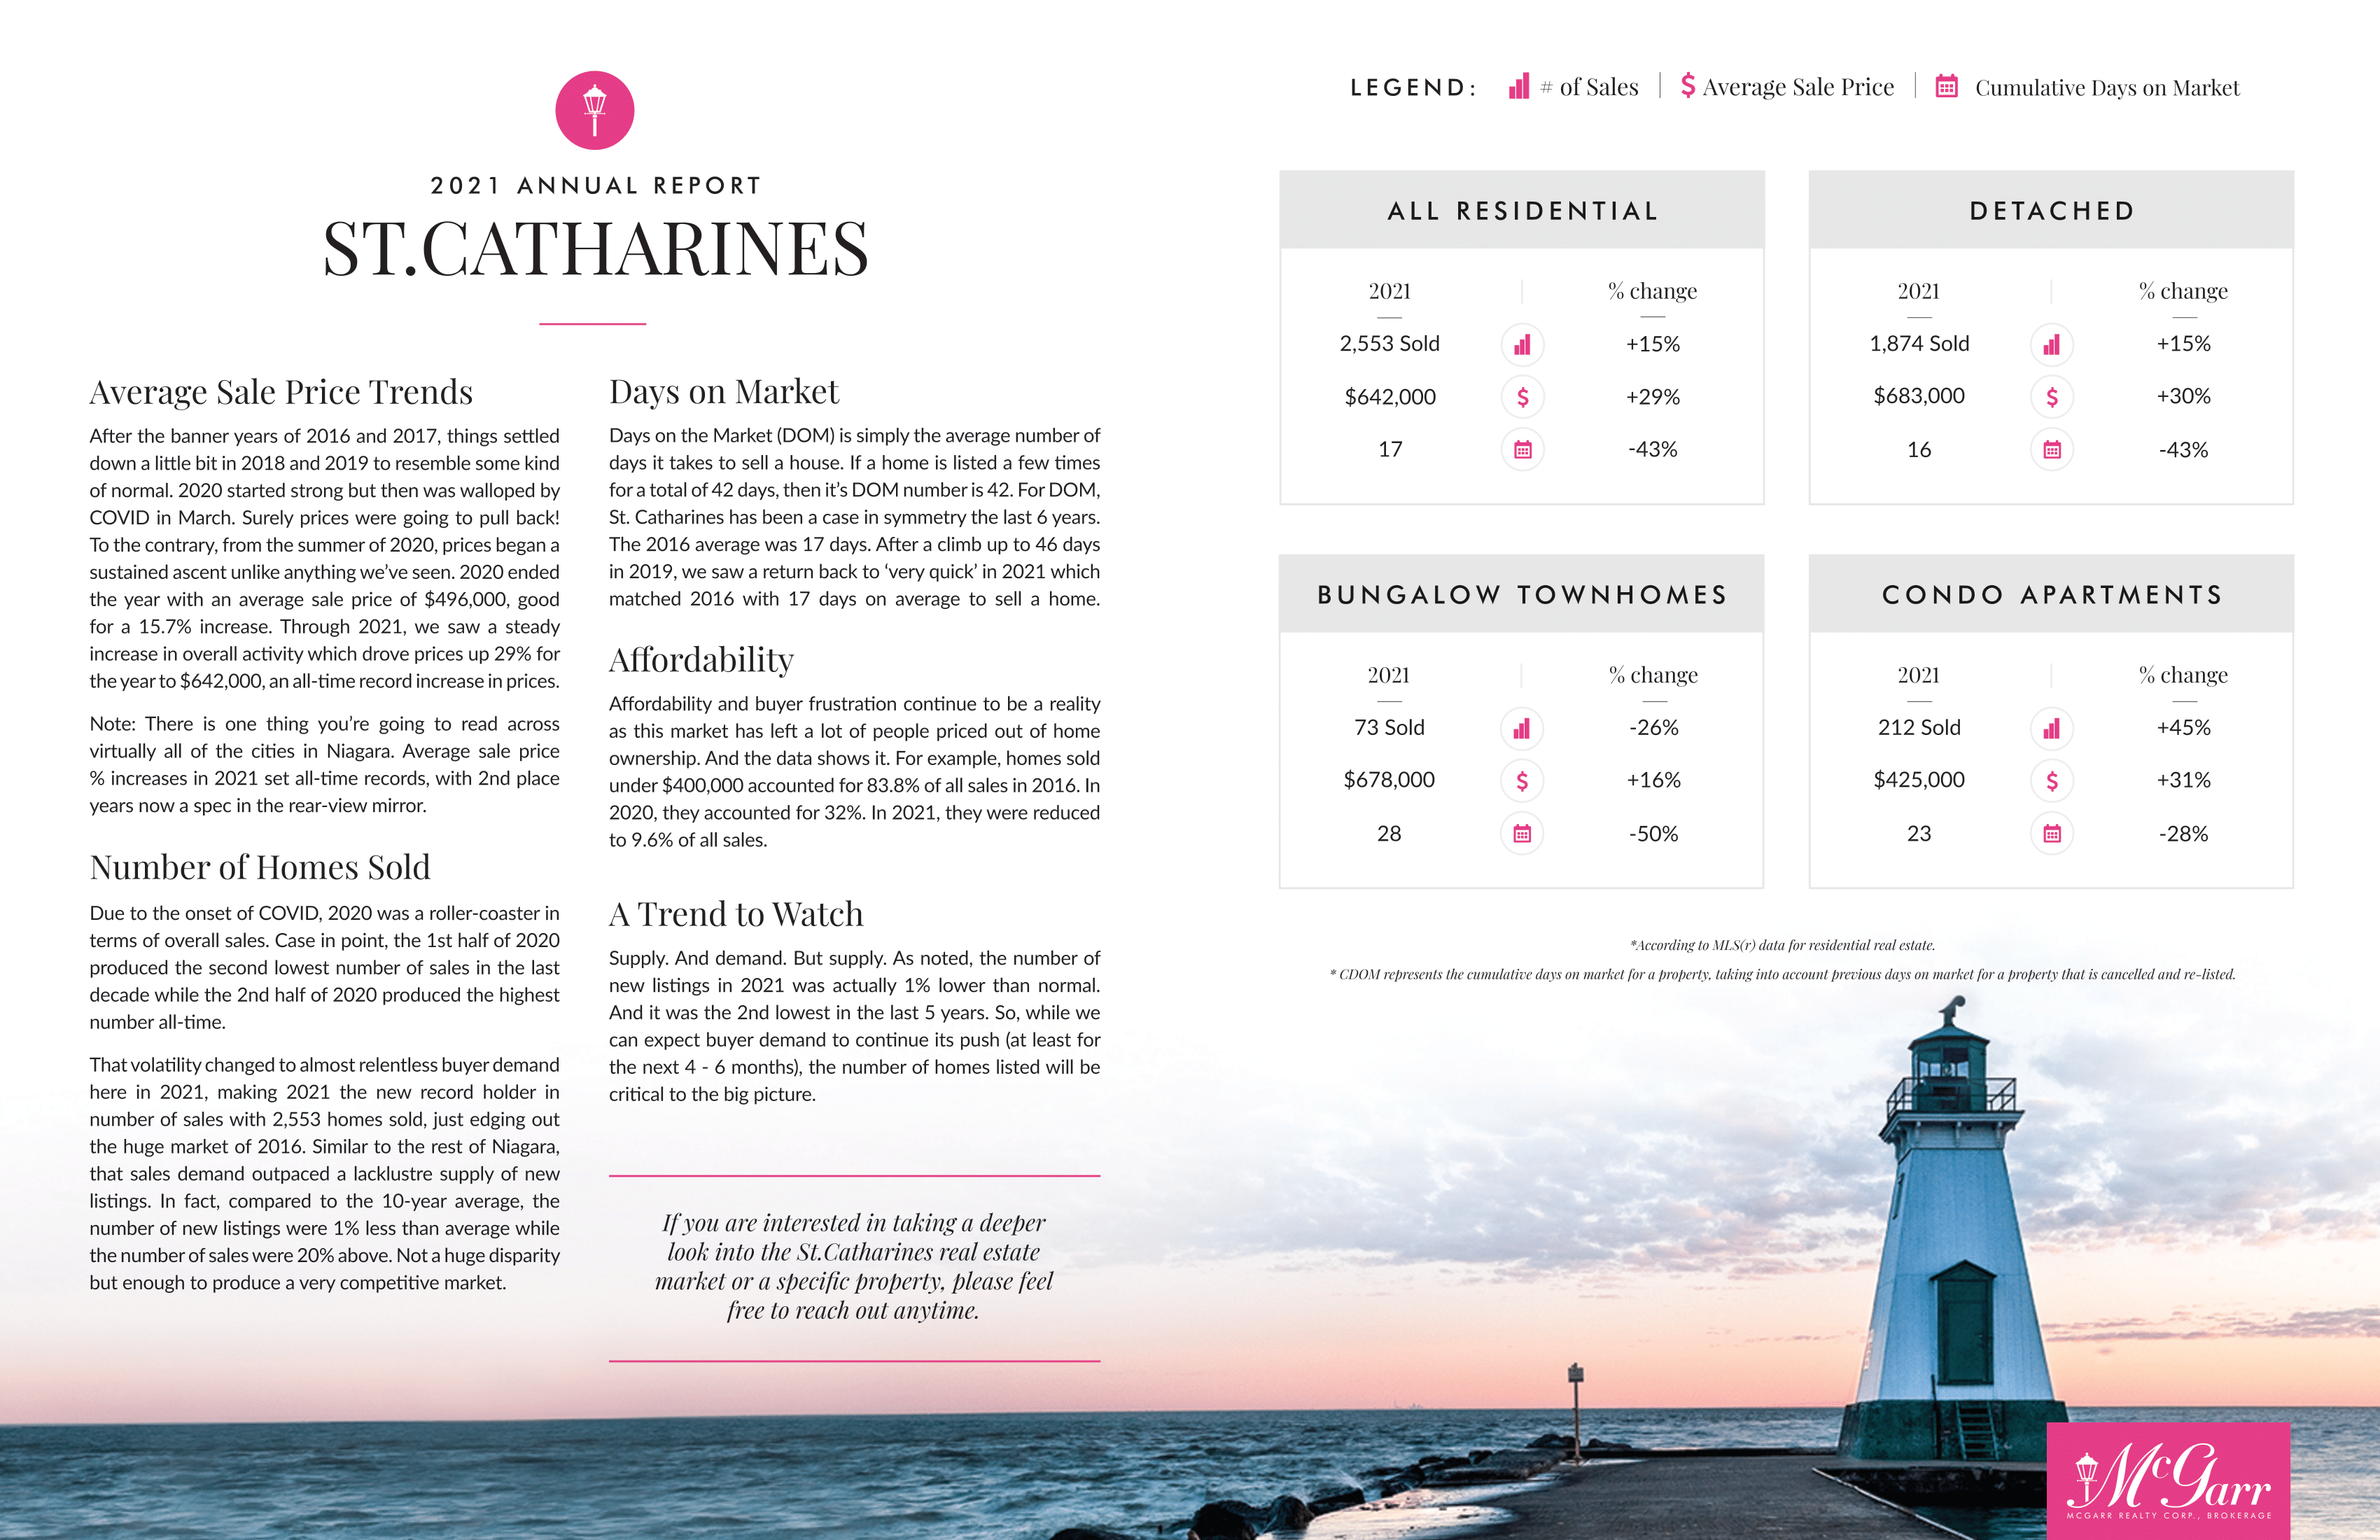 St. Catharines Market Report 2020